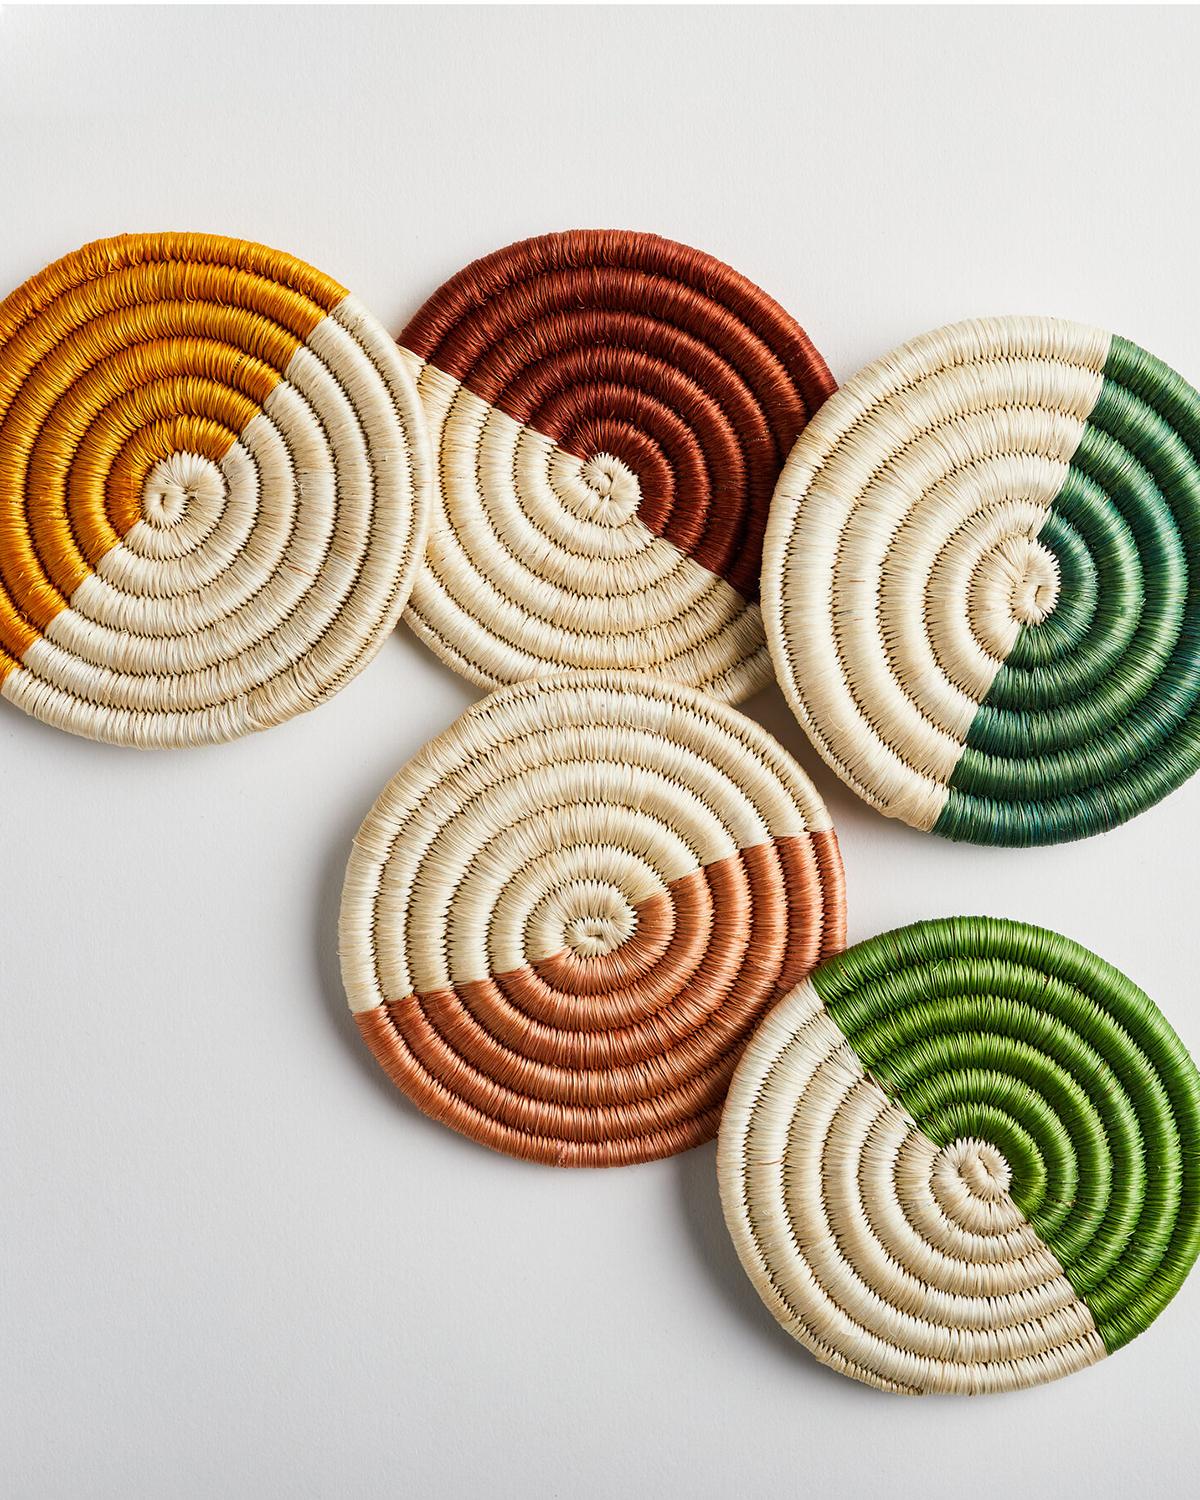 Monserrate Hand-Woven Coasters in Salmon Pink, set of 4 In New Condition For Sale In West Hollywood, CA